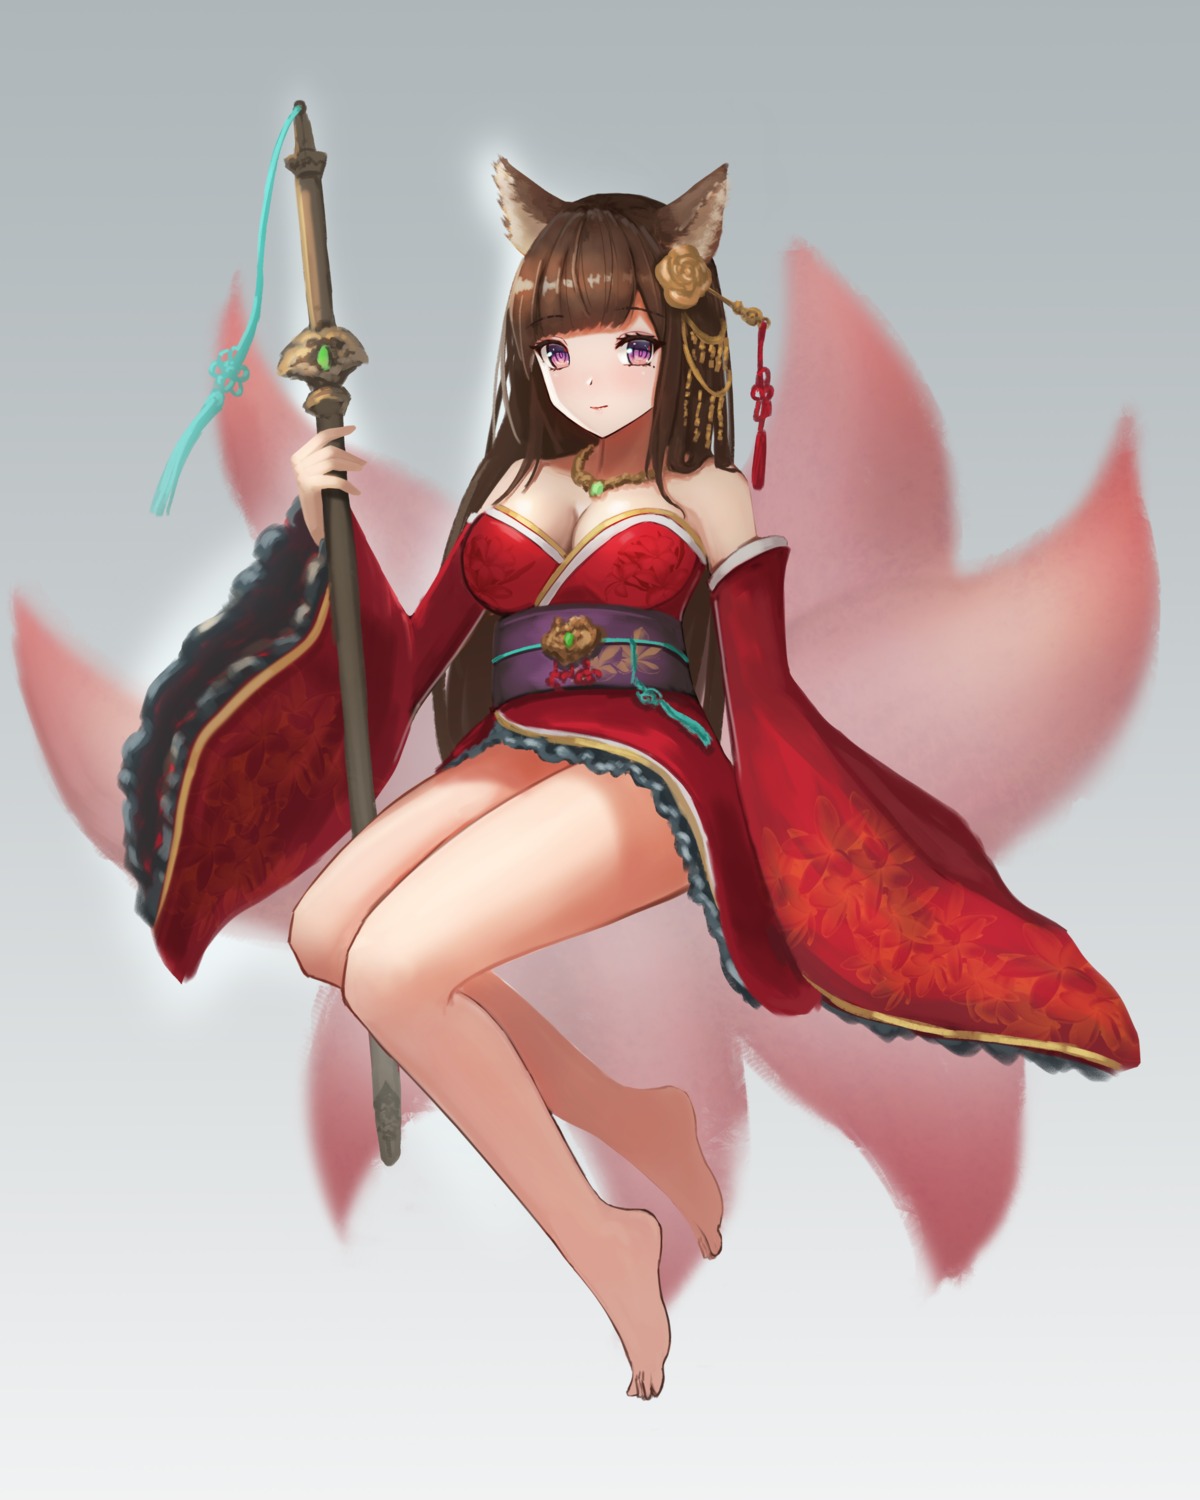 abeen_jhong animal_ears cleavage japanese_clothes kitsune no_bra sword tail